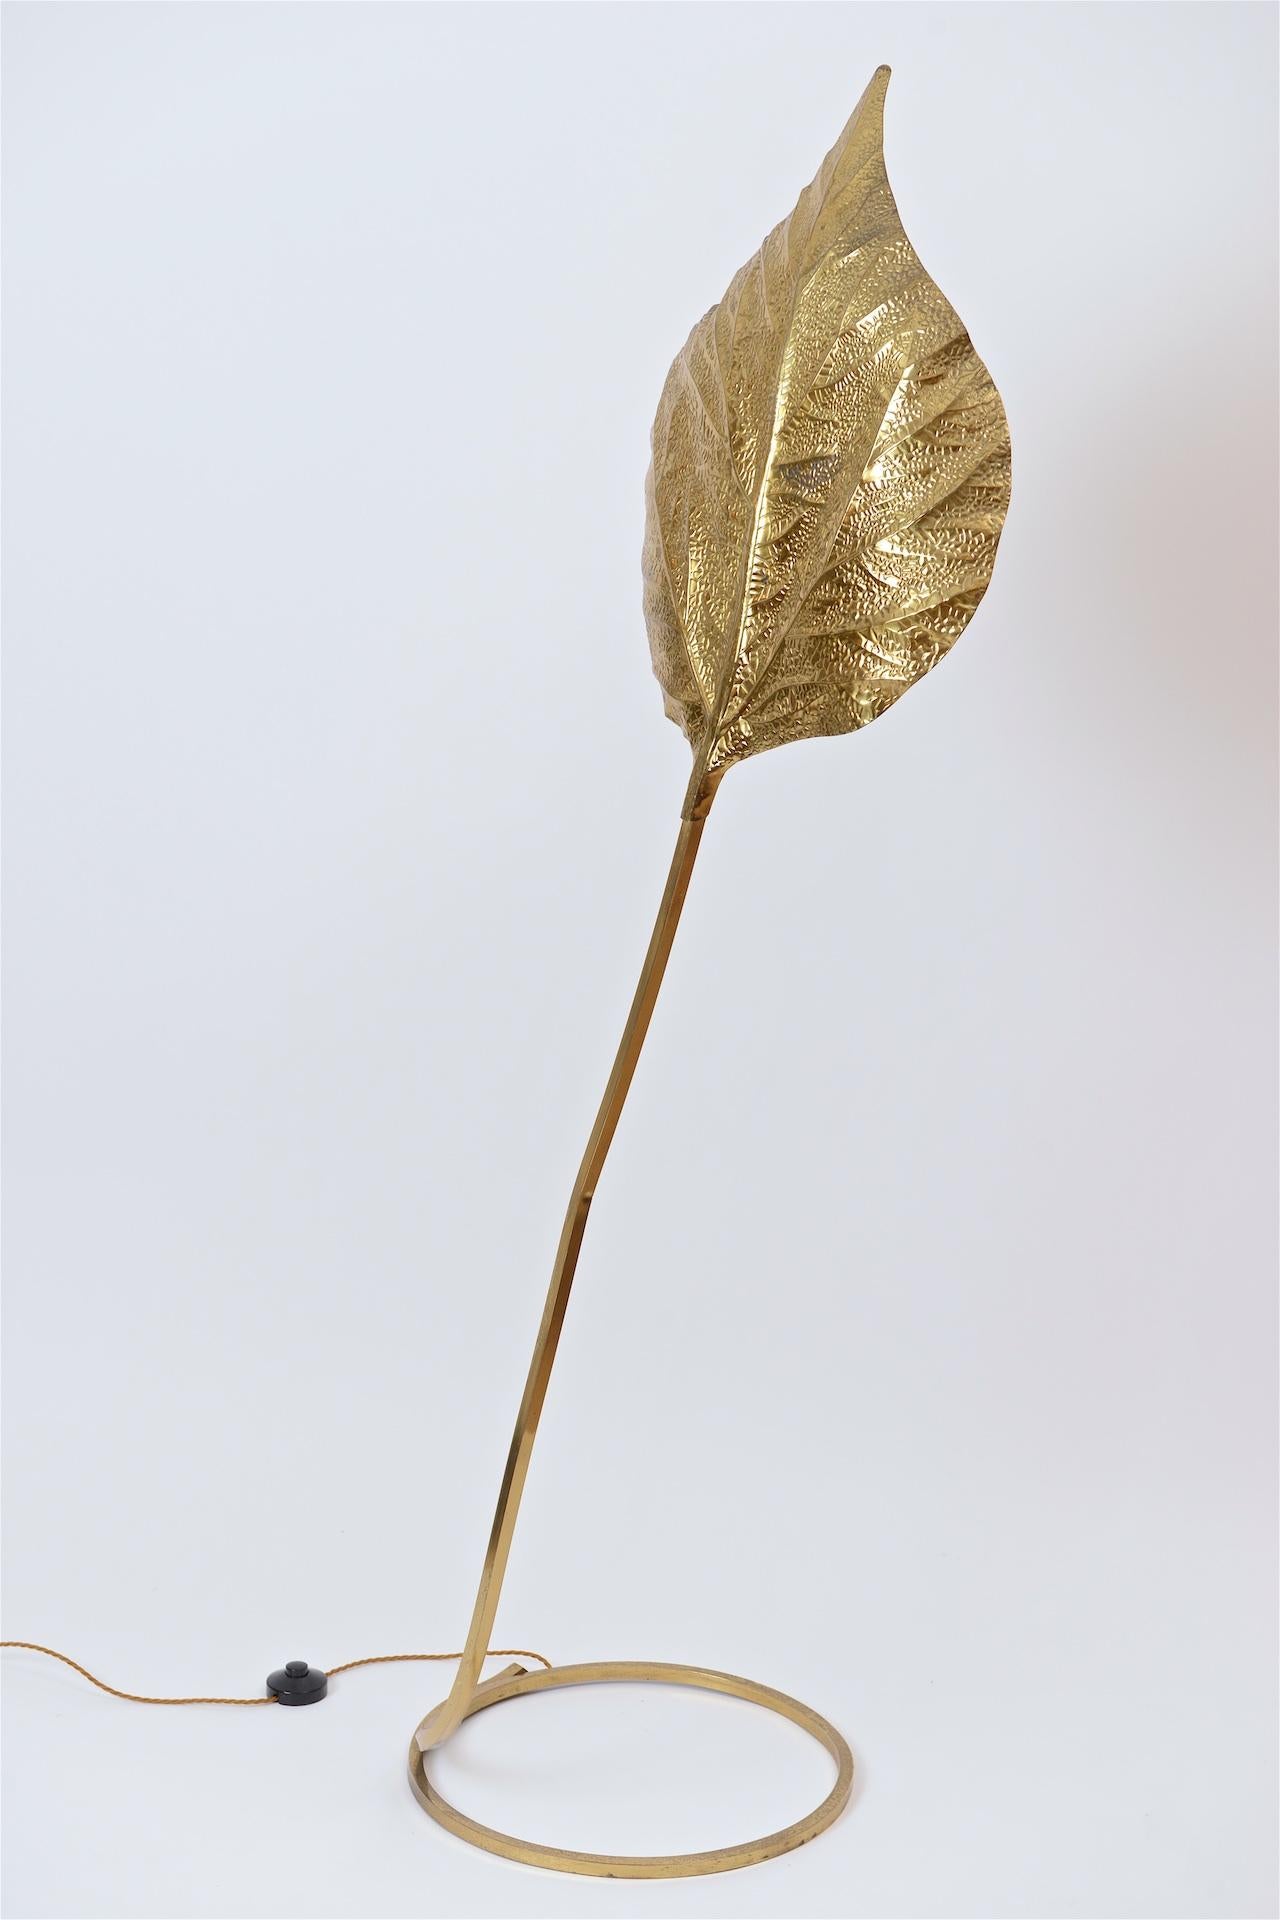 This iconic, single leaf ‘Rabarbaro’ lamp by Tommaso Barbi was produced by Carlo Giorgi in Italy, circa 1970. The circular brass frame sweeps upwards from the base to support the large, decorative, hammered brass leaf. The lamp produces a beautiful